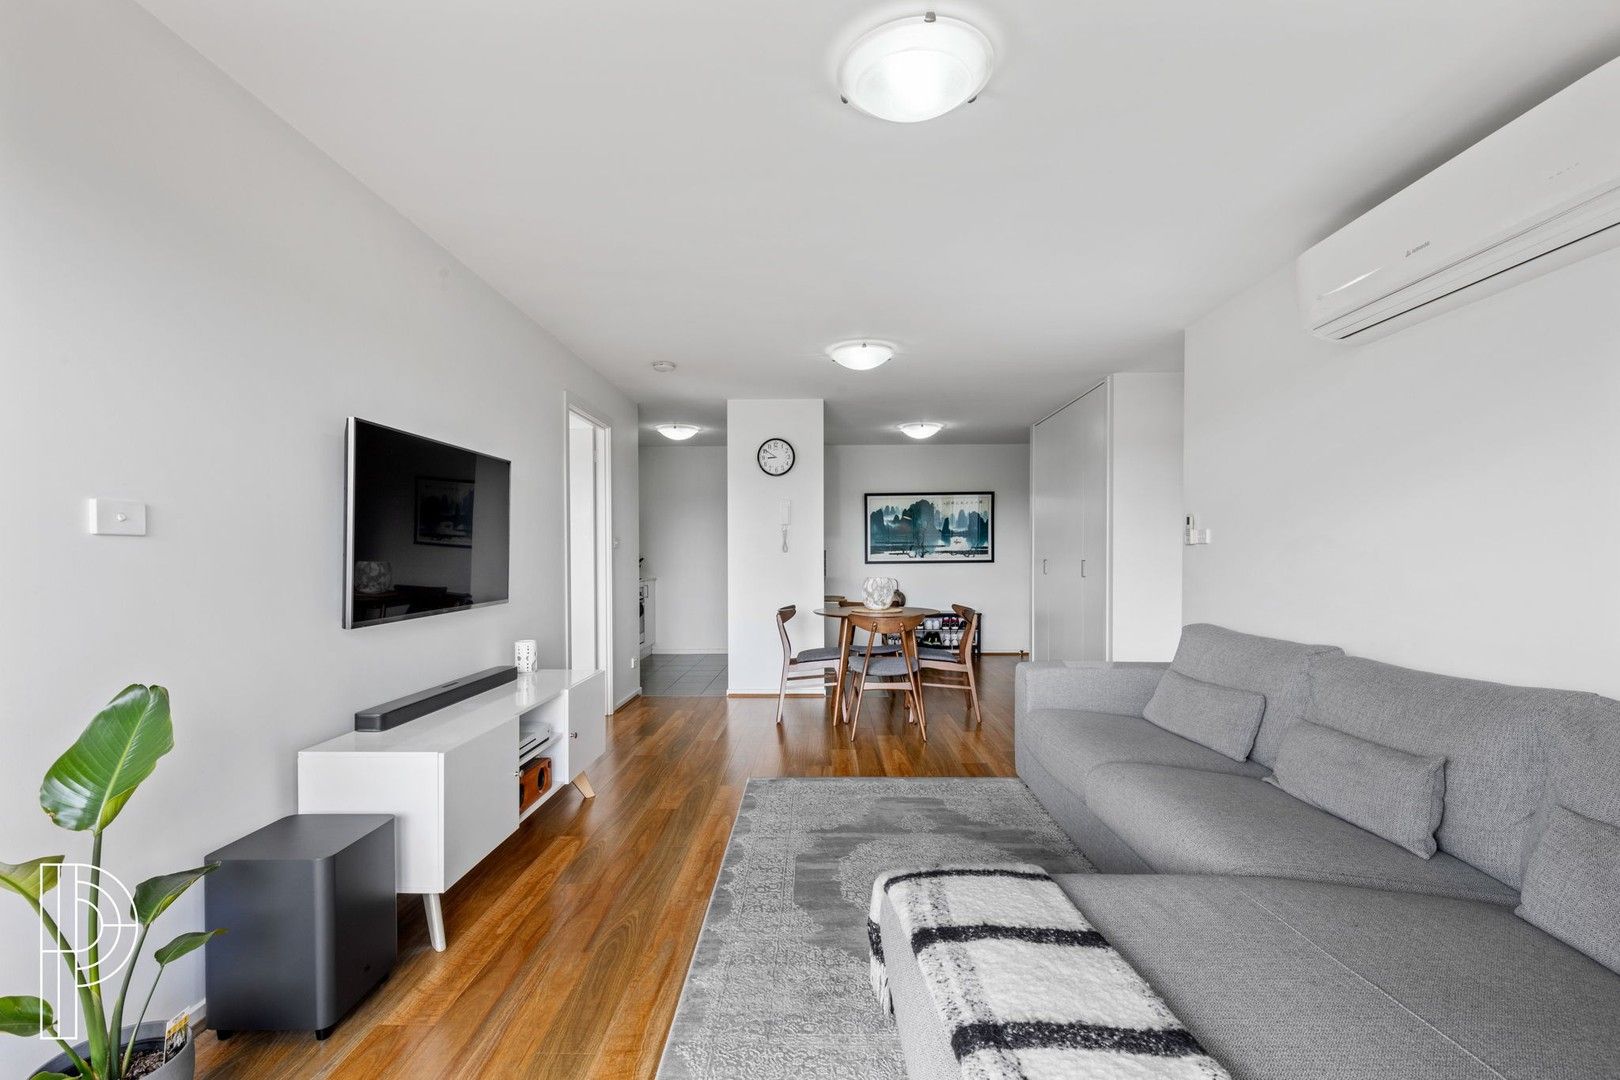 2 bedrooms Apartment / Unit / Flat in 127/41 Philip Hodgins Street WRIGHT ACT, 2611